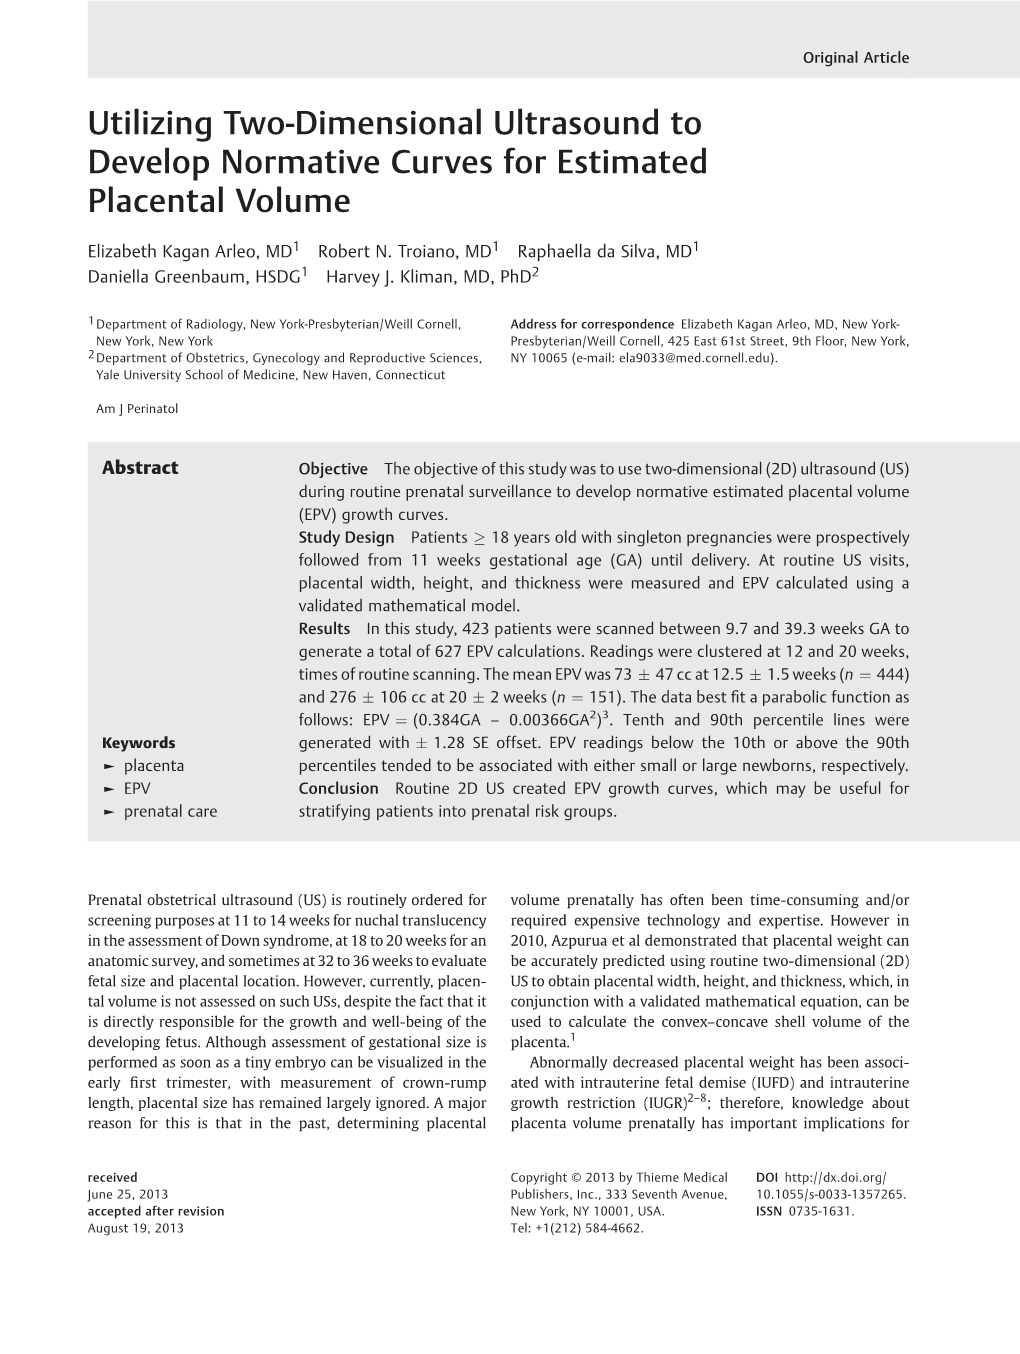 Utilizing Two-Dimensional Ultrasound to Develop Normative Curves for Estimated Placental Volume